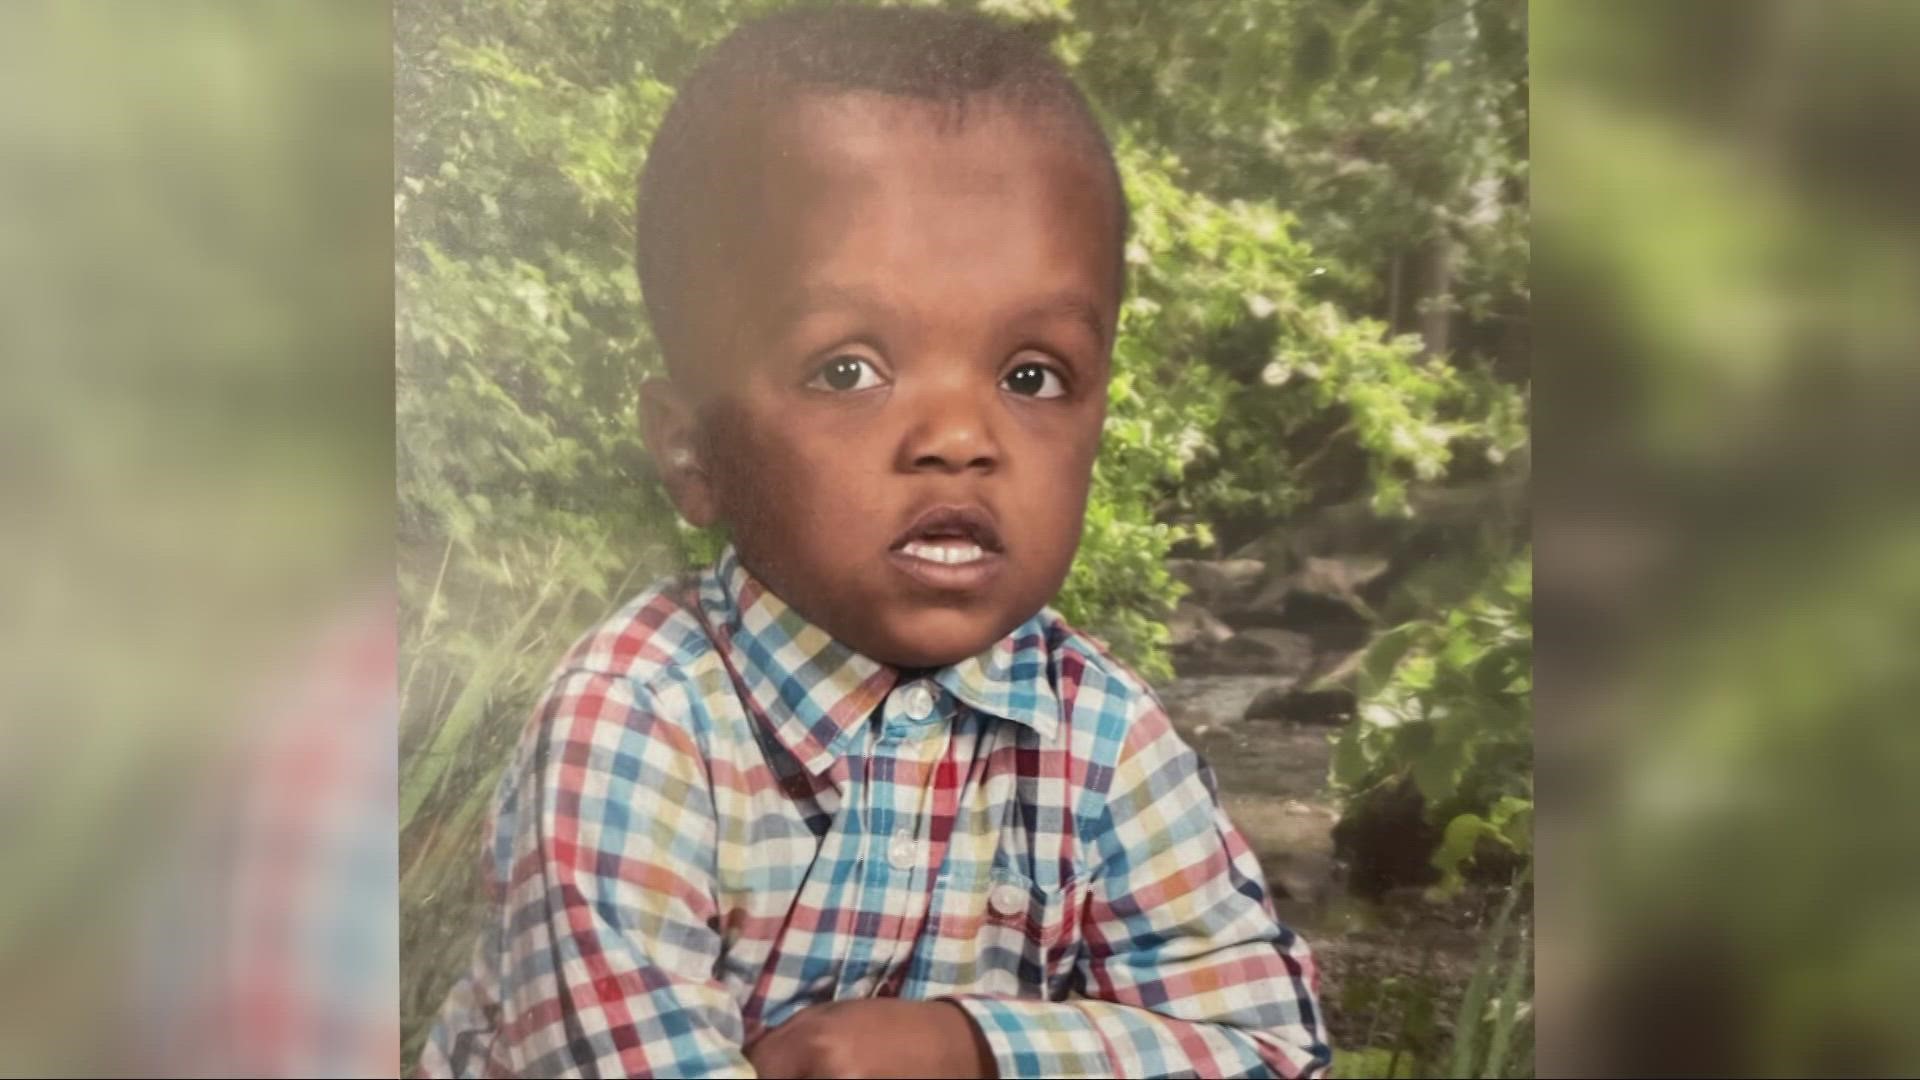 Cayden Williams' uncle claims the child was in an upstairs bedroom when an aunt downstairs shot a gun through the ceiling, striking him in the head.